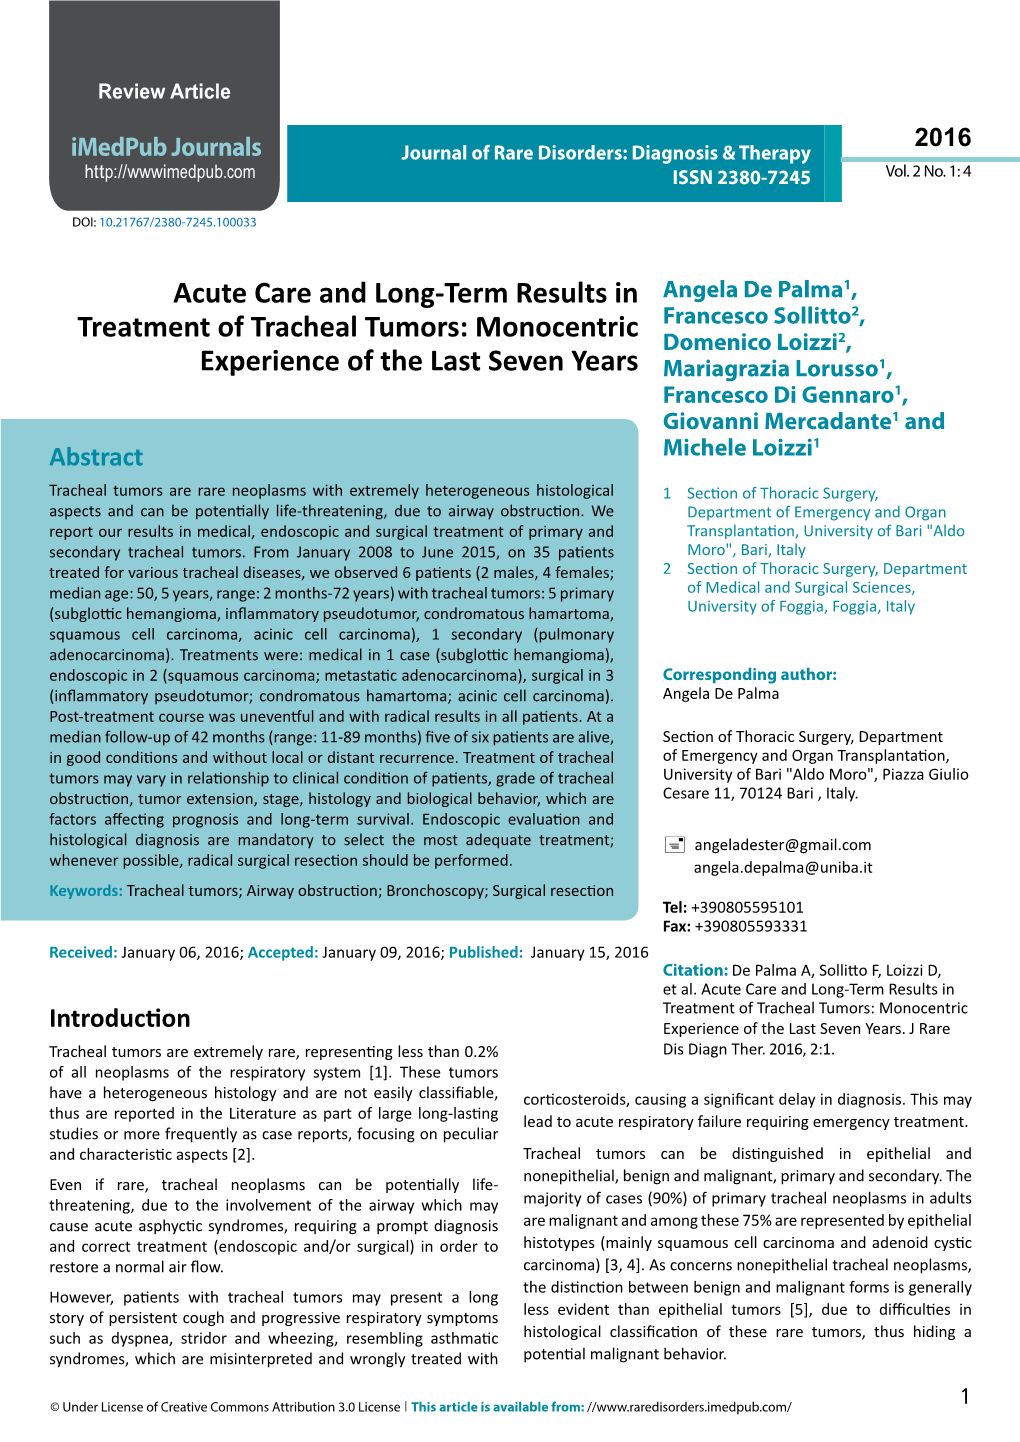 Acute Care and Long-Term Results in Treatment of Tracheal Tumors: Monocentric Introduction Experience of the Last Seven Years